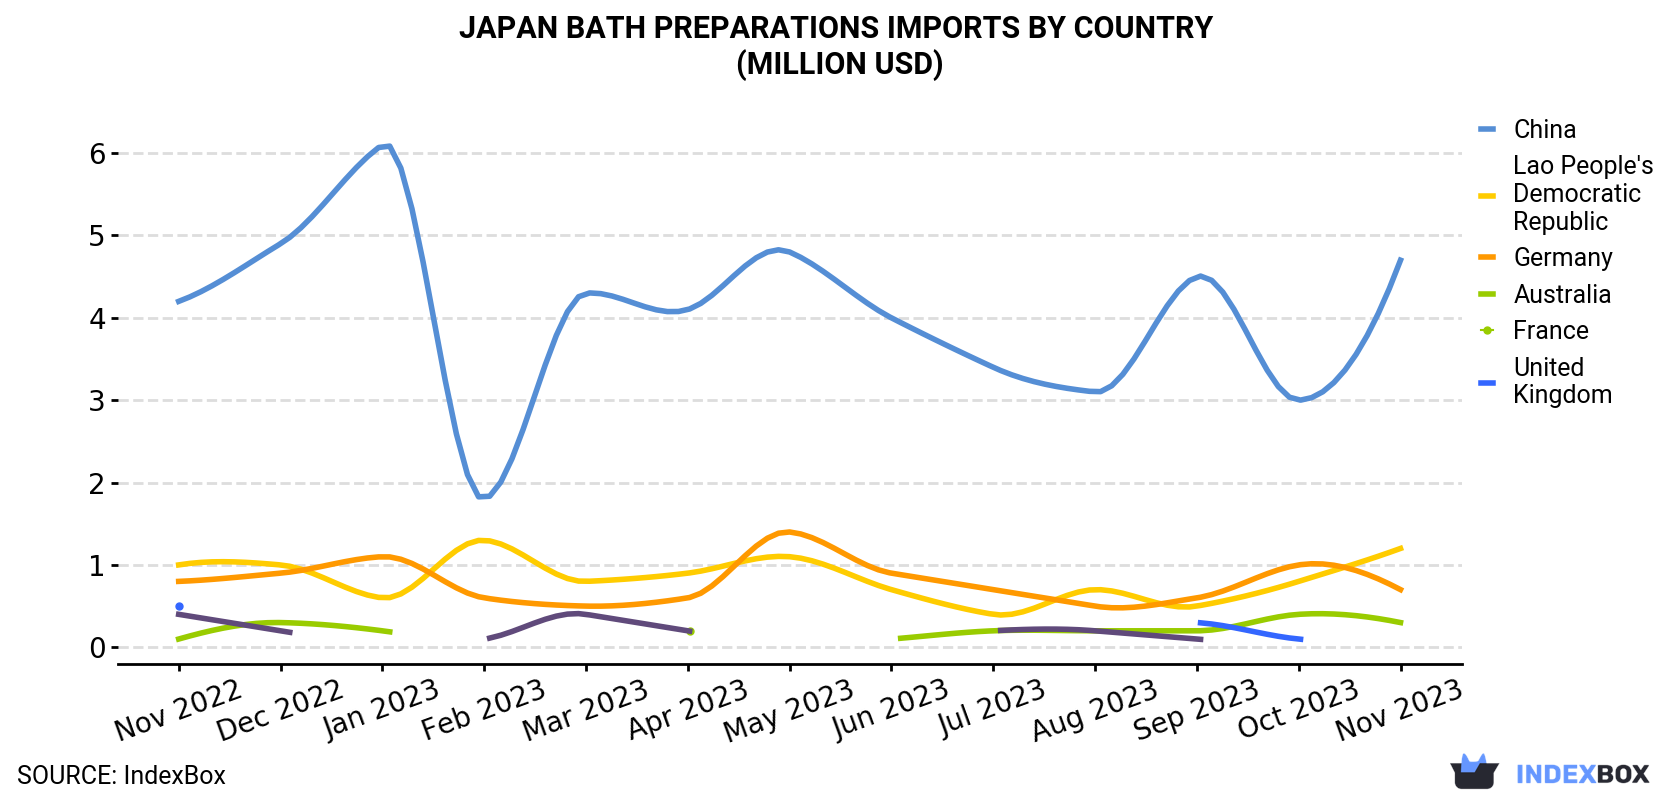 Japan Bath Preparations Imports By Country (Million USD)